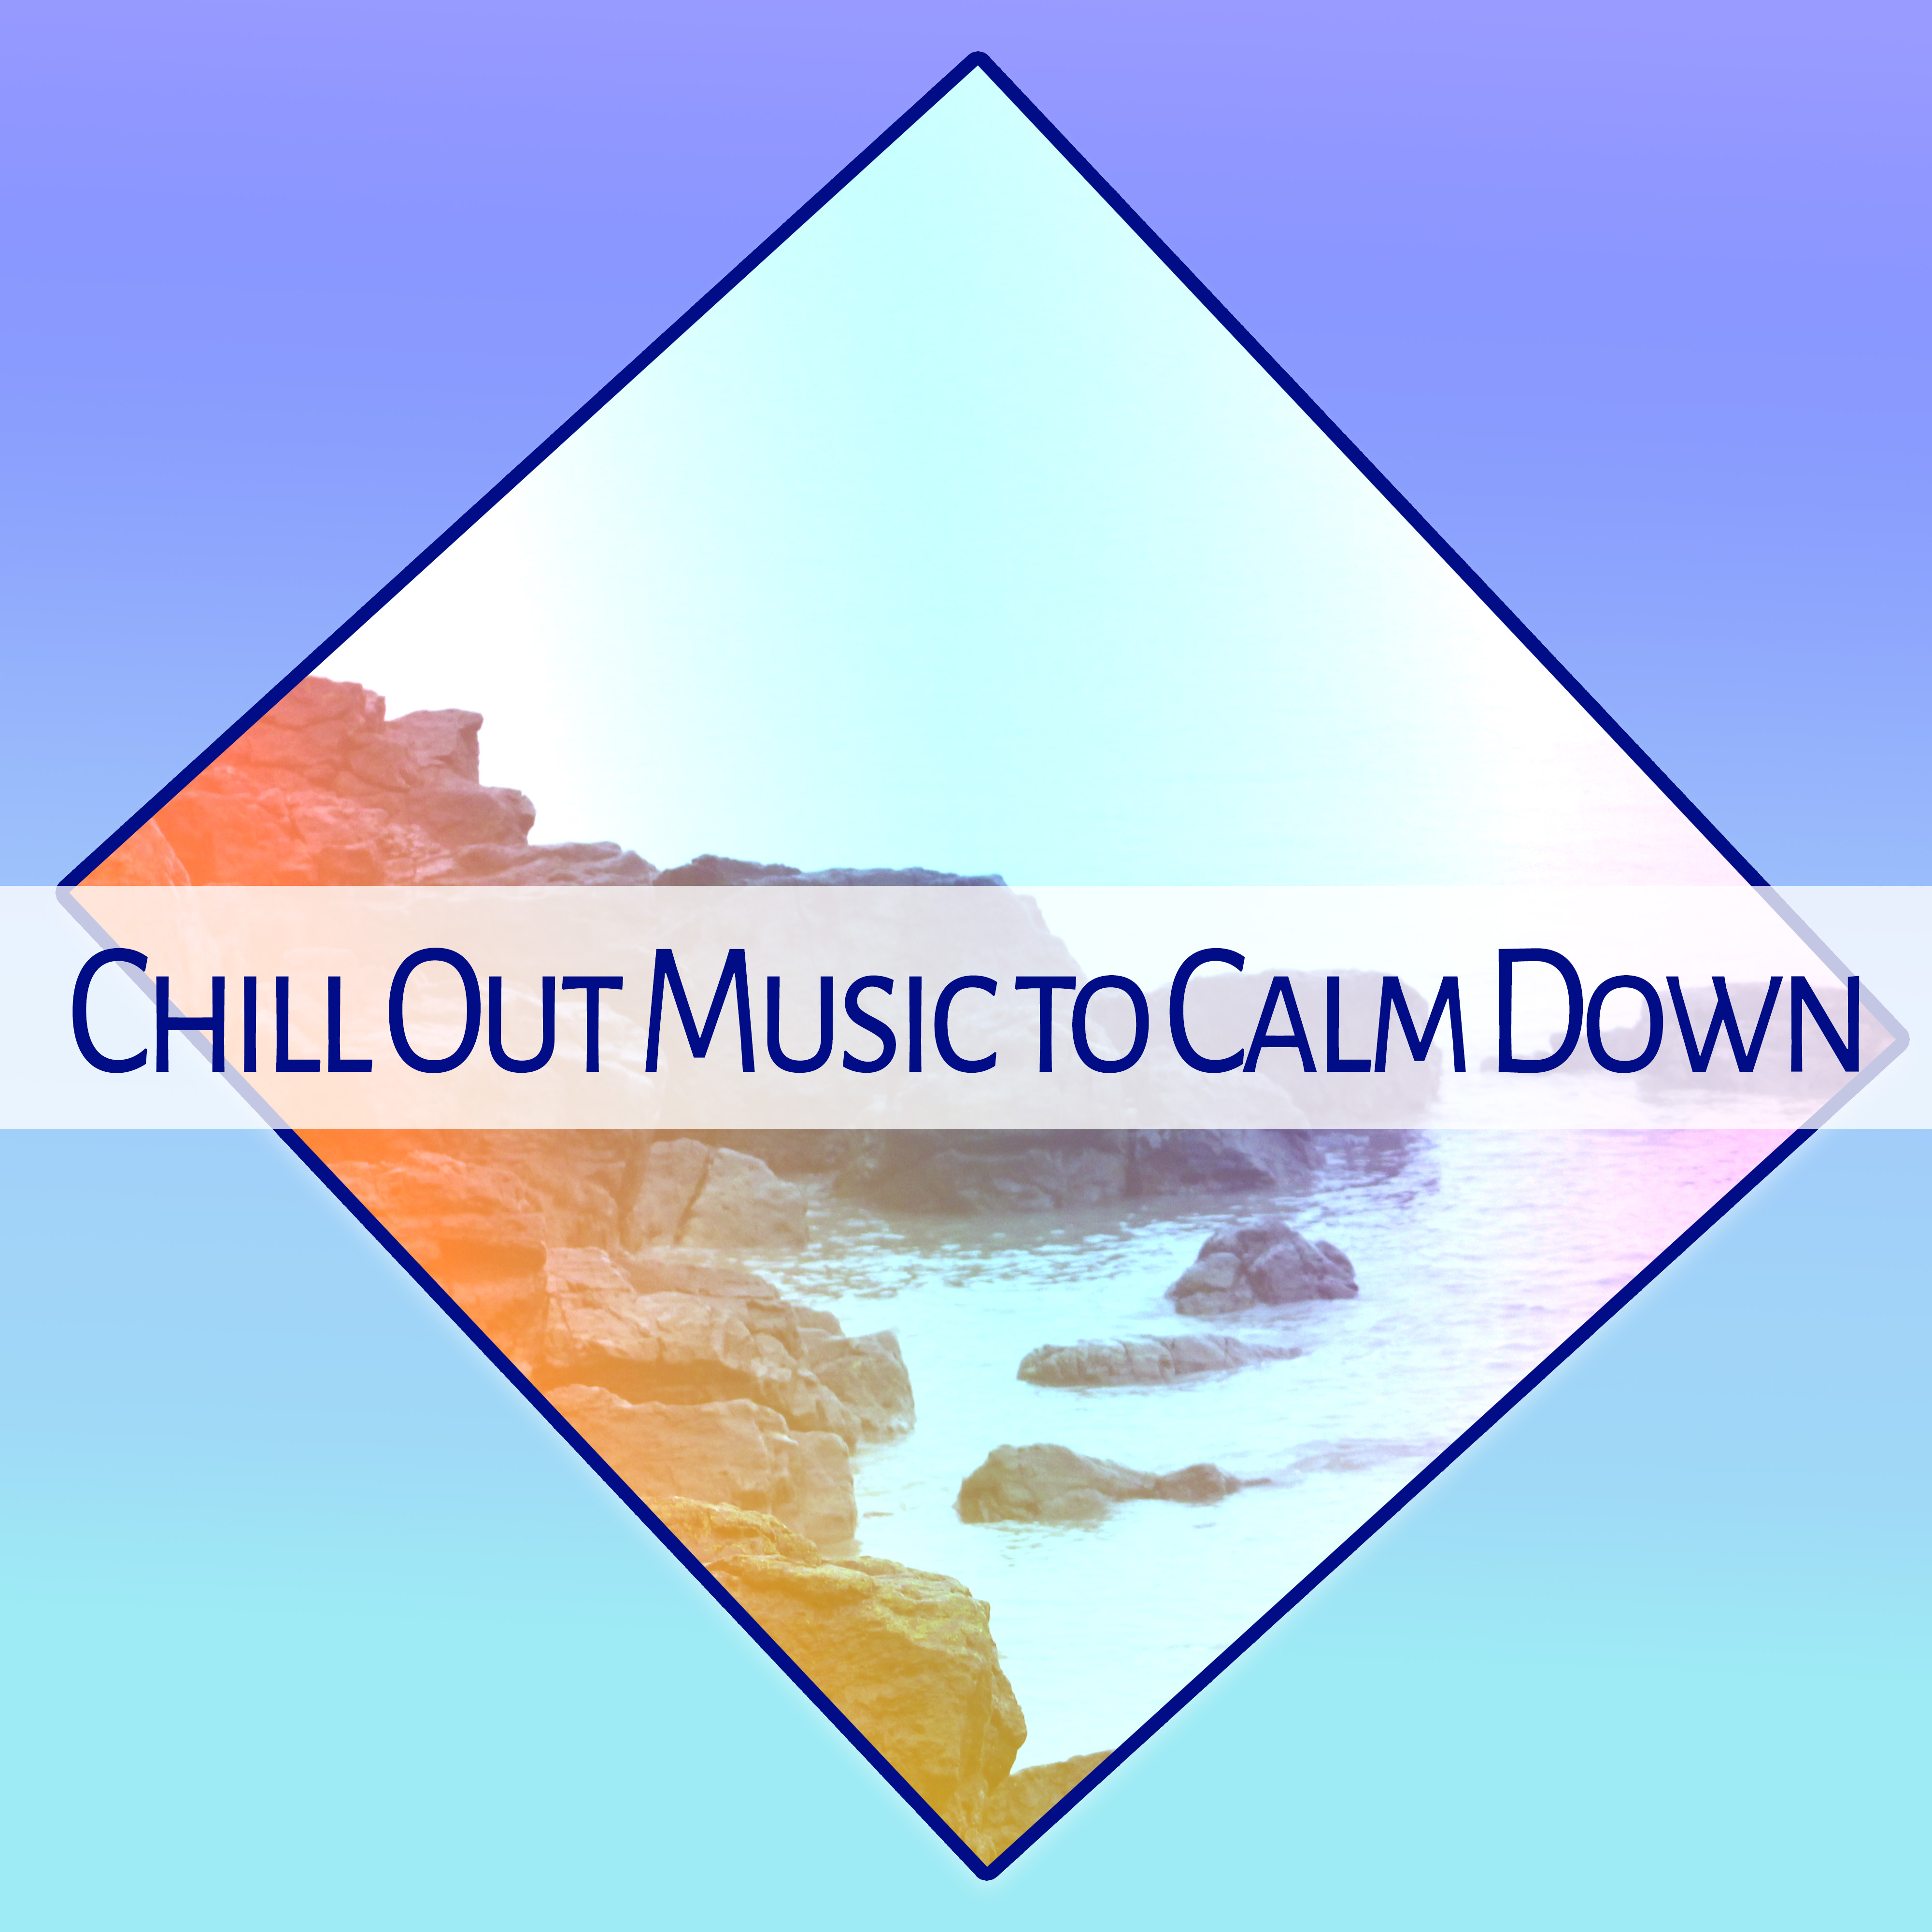 Chill Out Music to Calm Down  Easy Listening, Chill All Day, Music to Rest  Relax